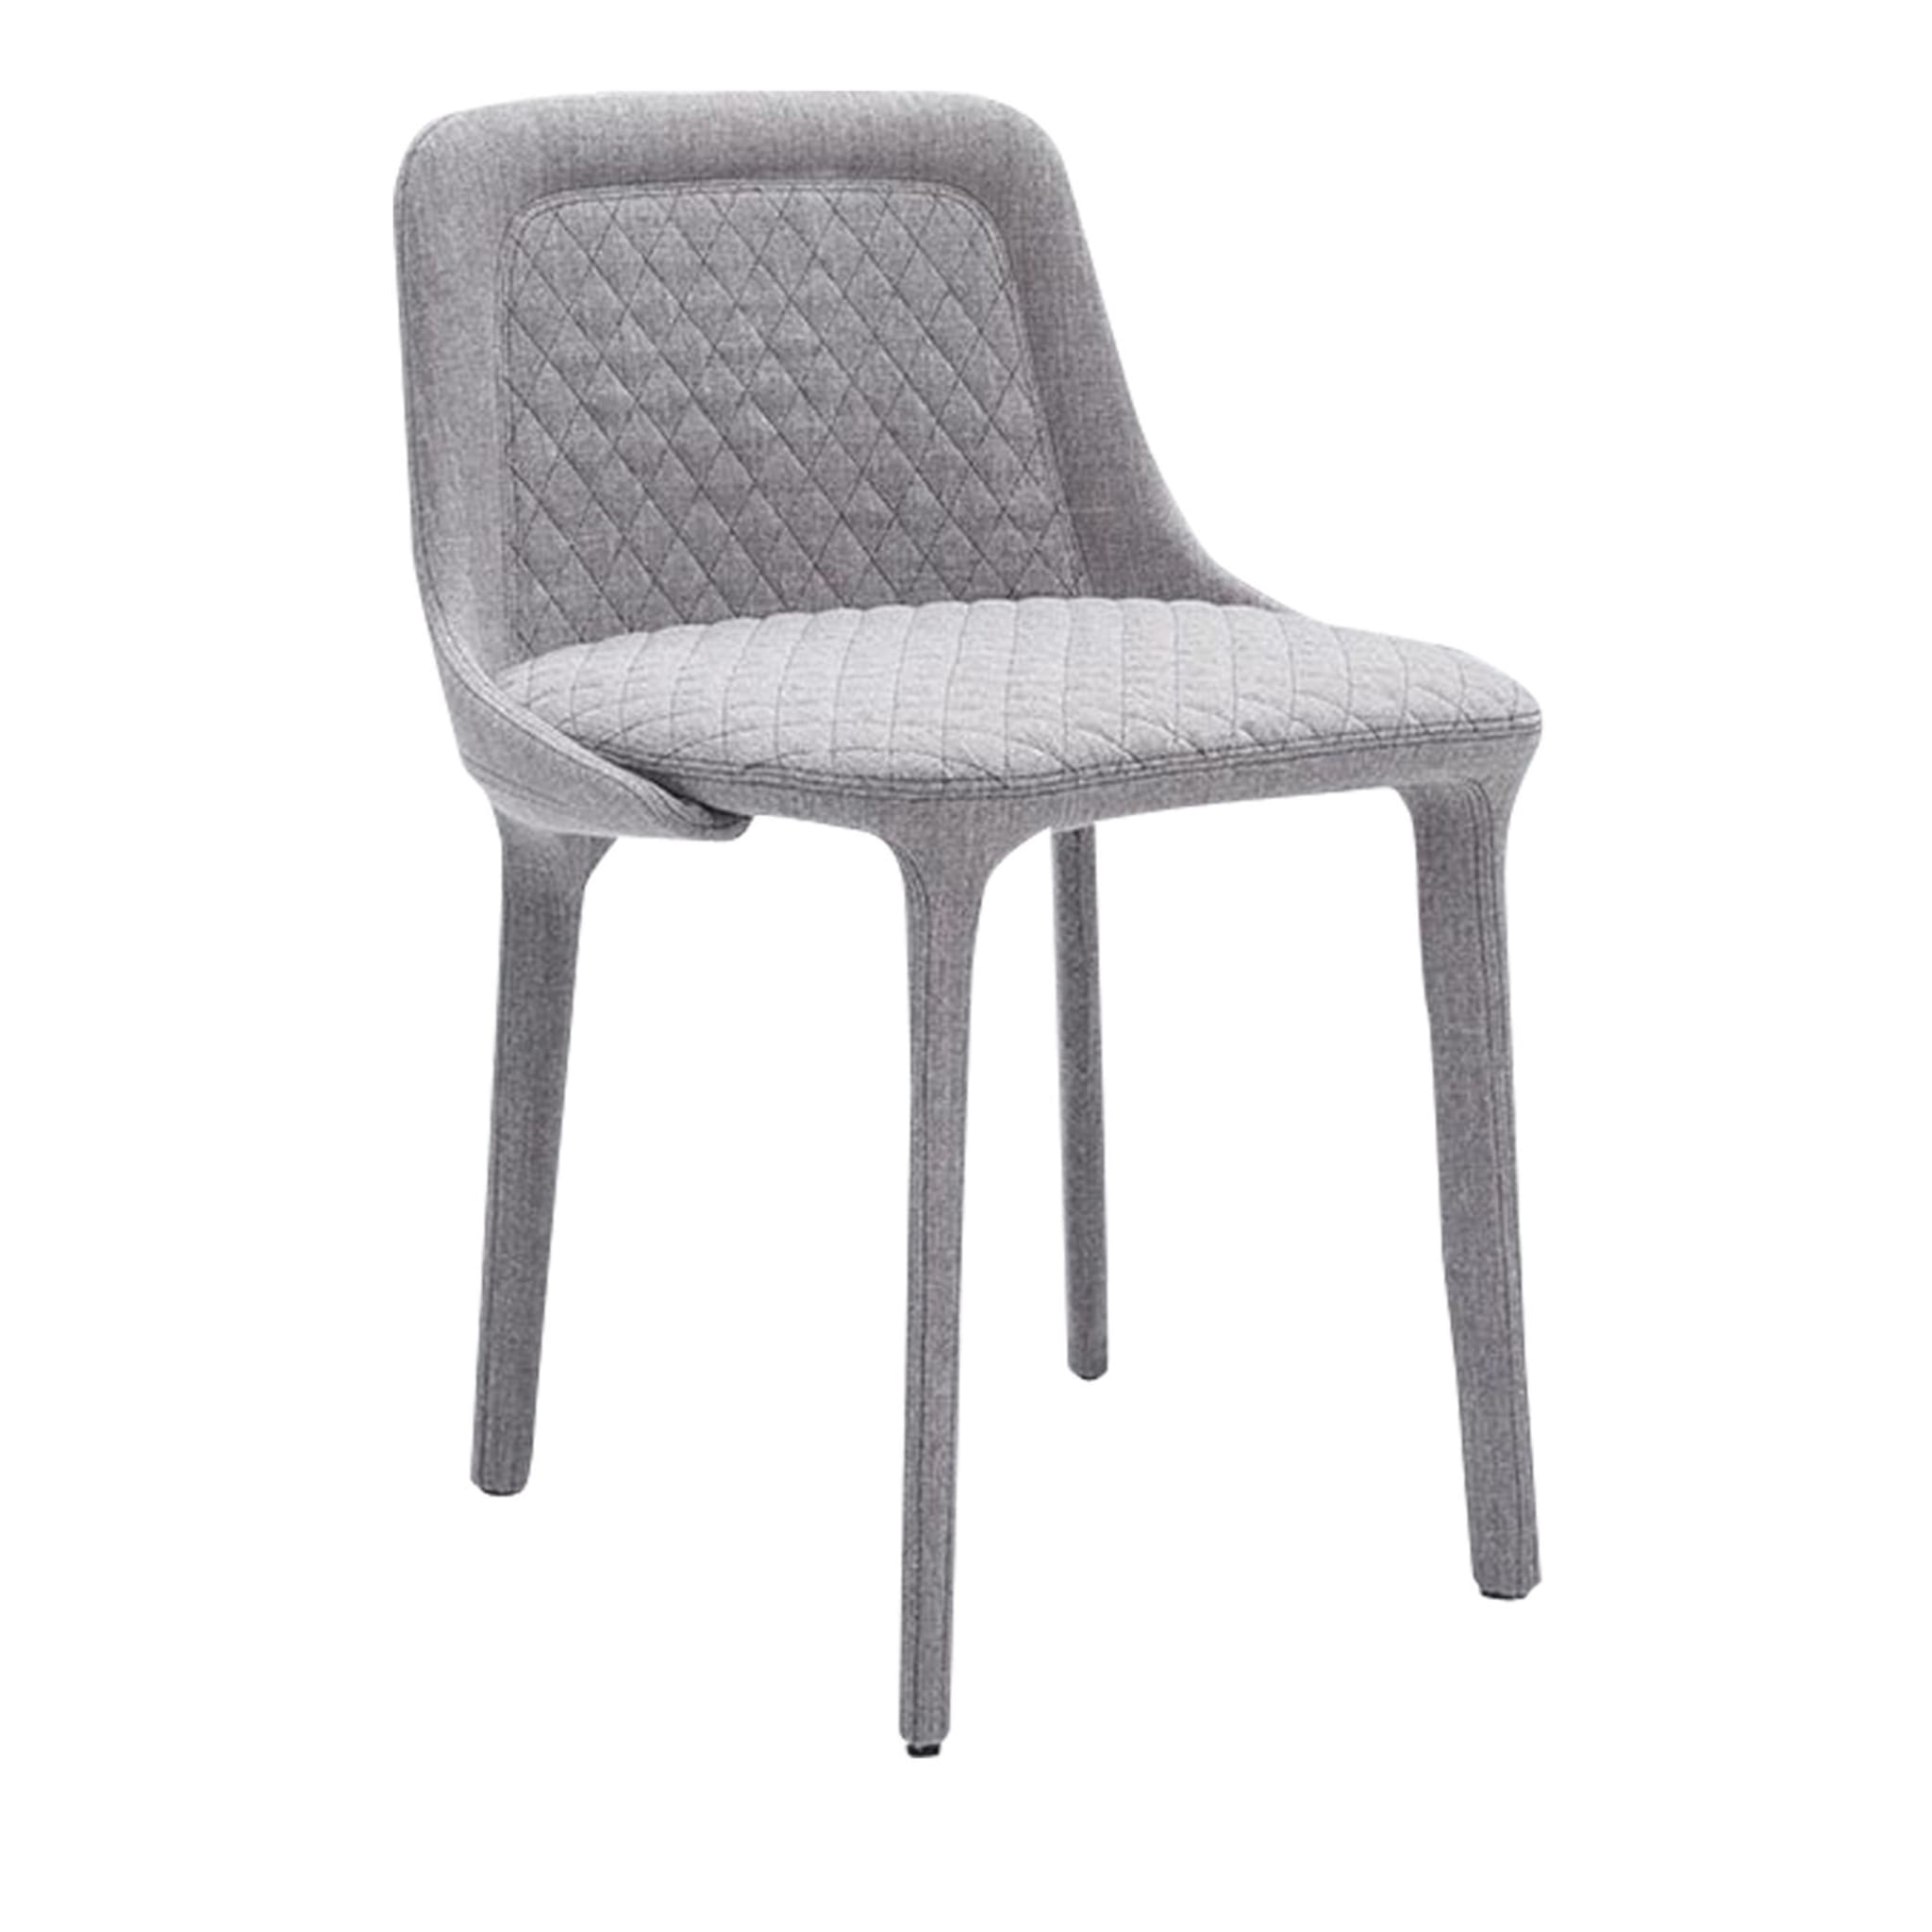 Lepel Gray Quilted Chair by Luca Nichetto - Main view